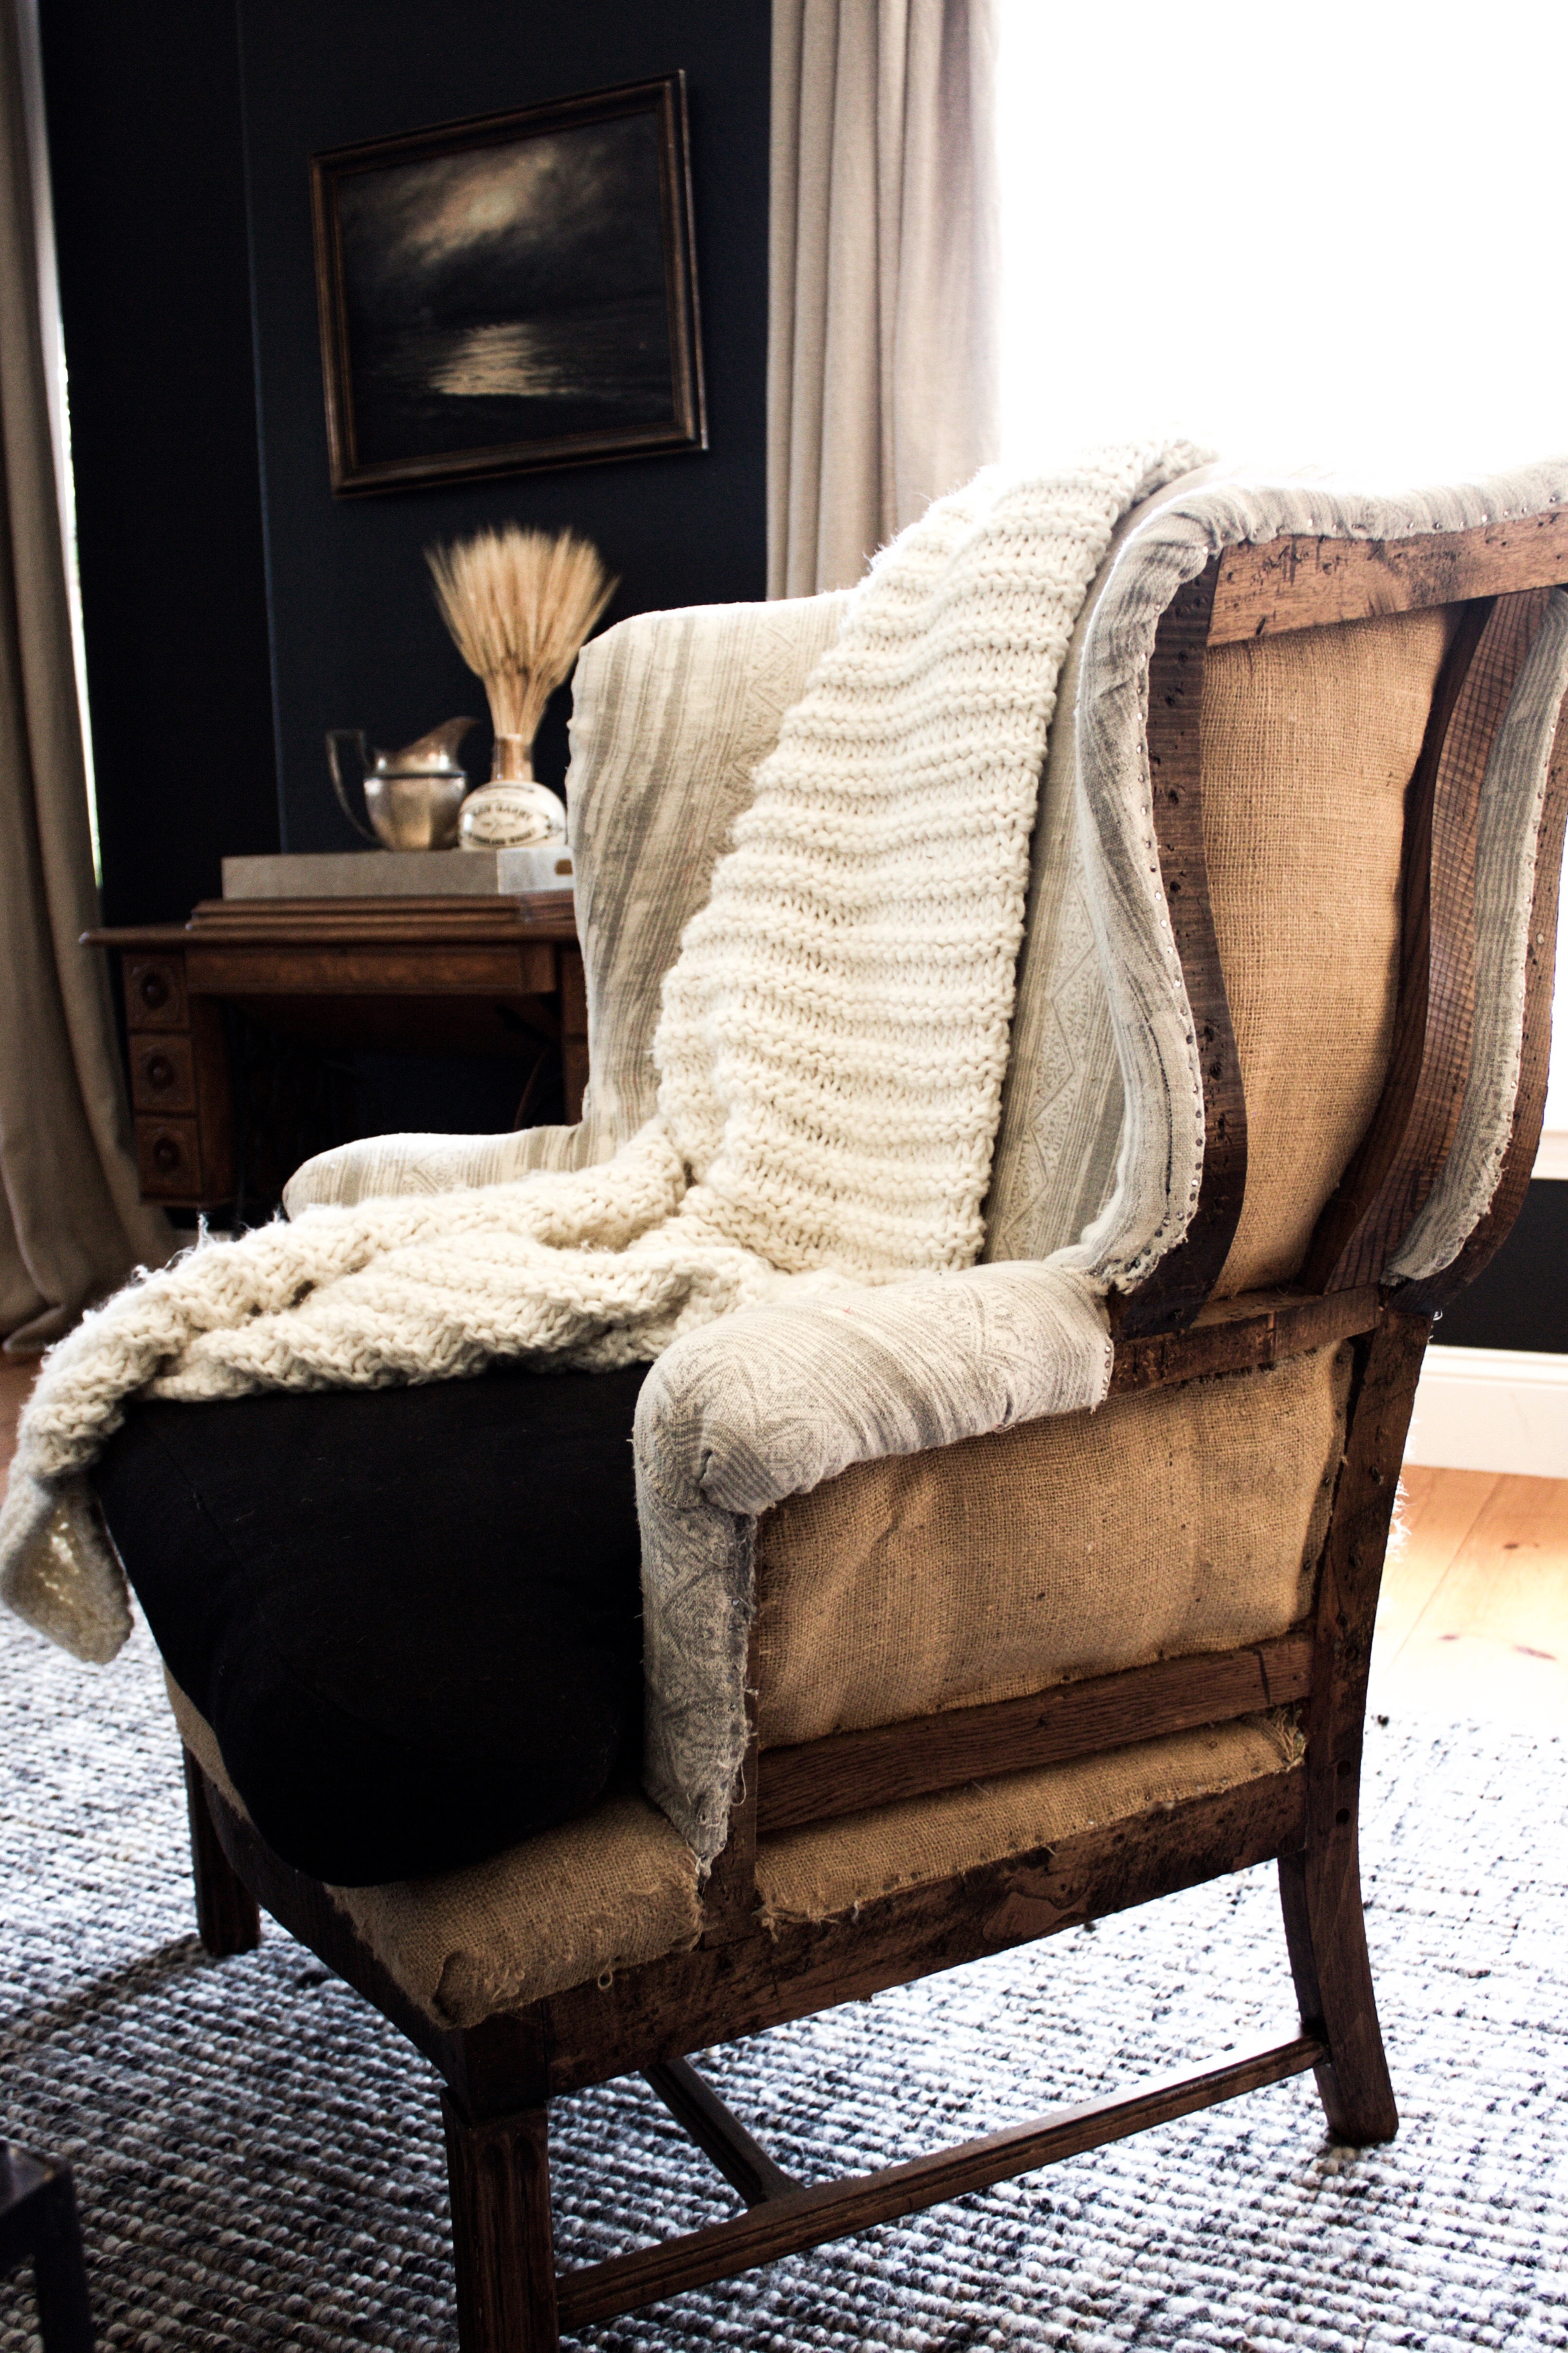 Deconstructed wing back chair with exposed wood frame, black seat cushion, mudcloth, and burlap upholstery